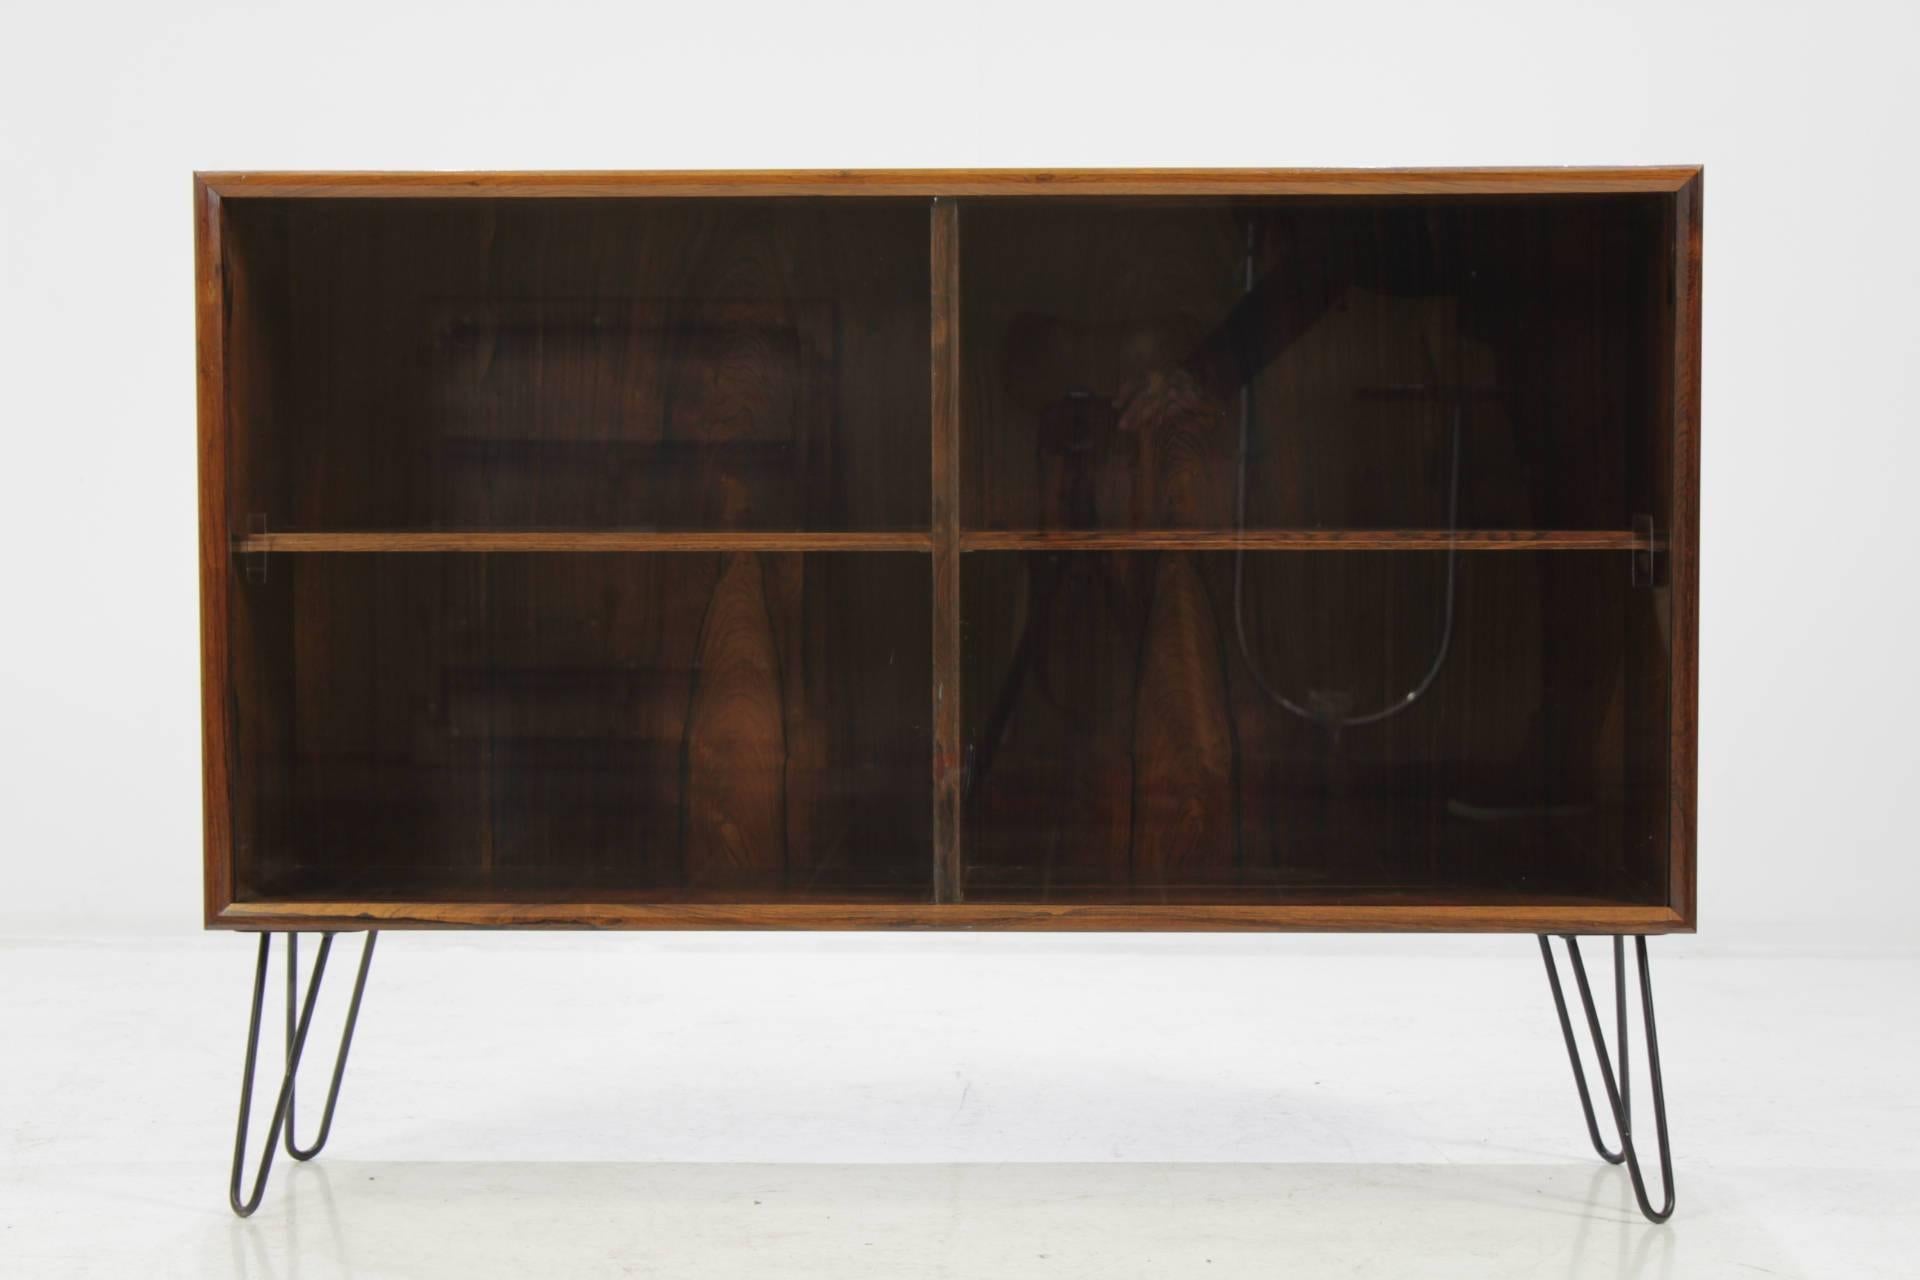 This cabinet features two sliding doors made of glass and two inner adjustable shelves. The item was carefully restored. The hairpin iron legs were added afterwards.